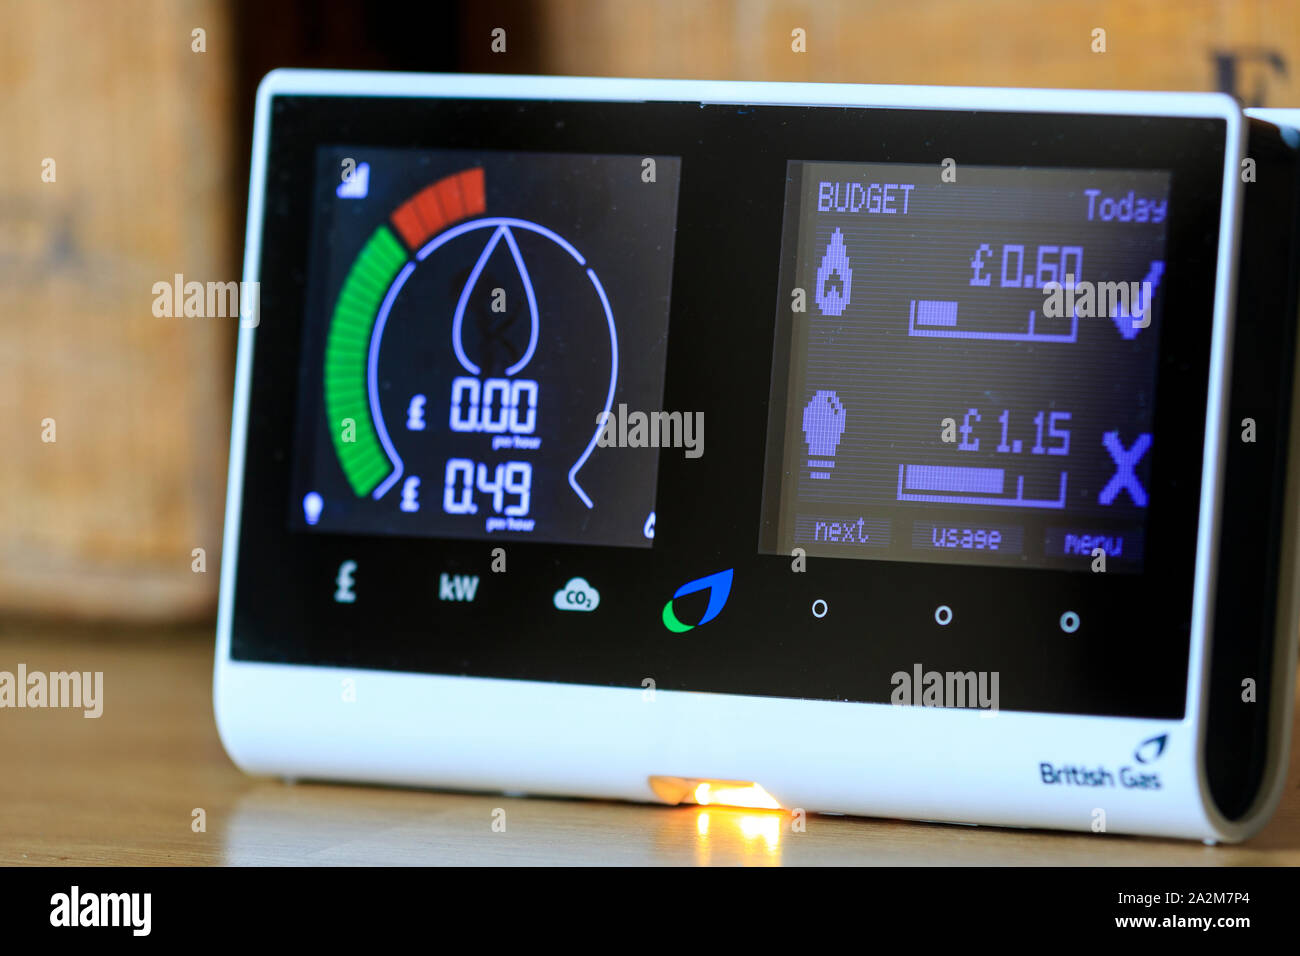 Household British Gas smart meter on worktop to monitor electric and gas consumption thereby saving money for the resident. Shows high energy use. Stock Photo